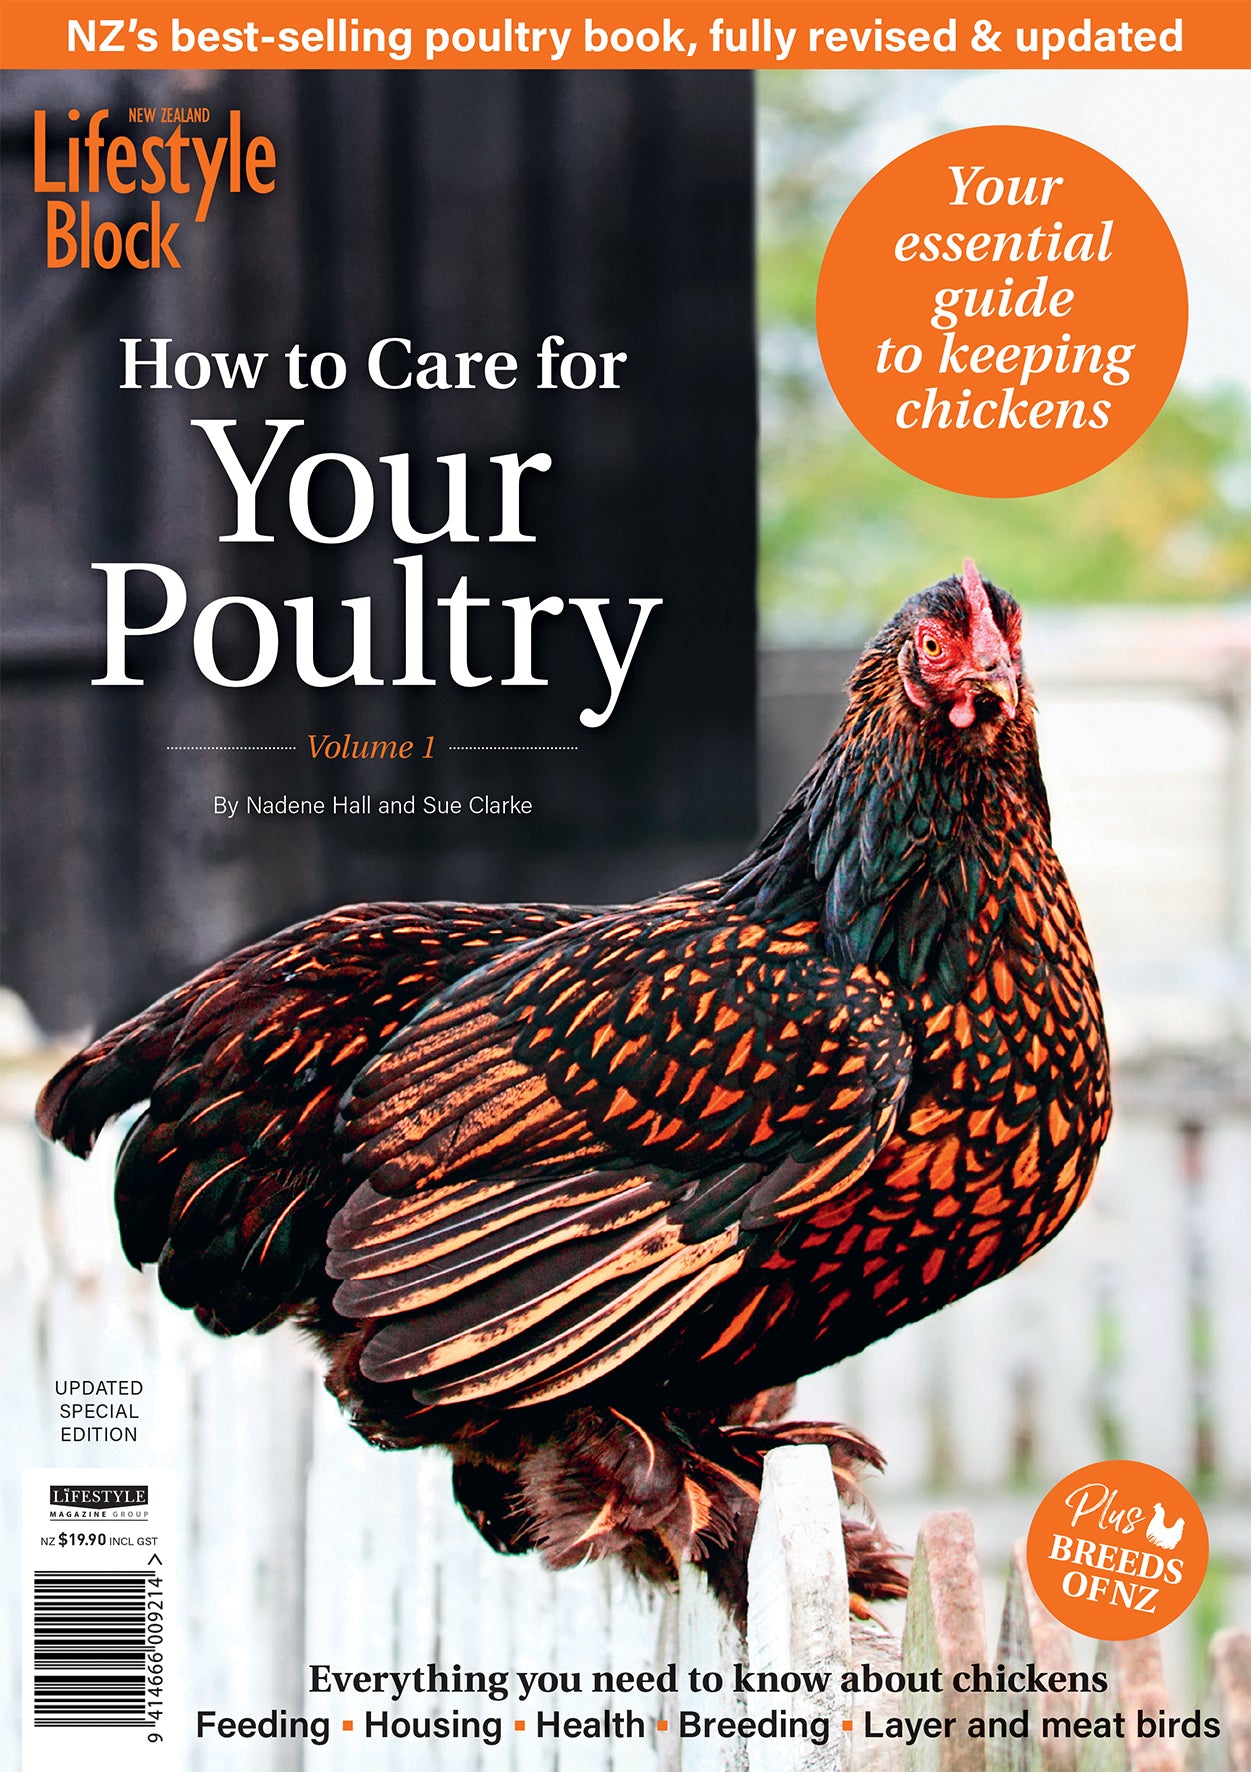 How To Care For Your Poultry, Volume 1